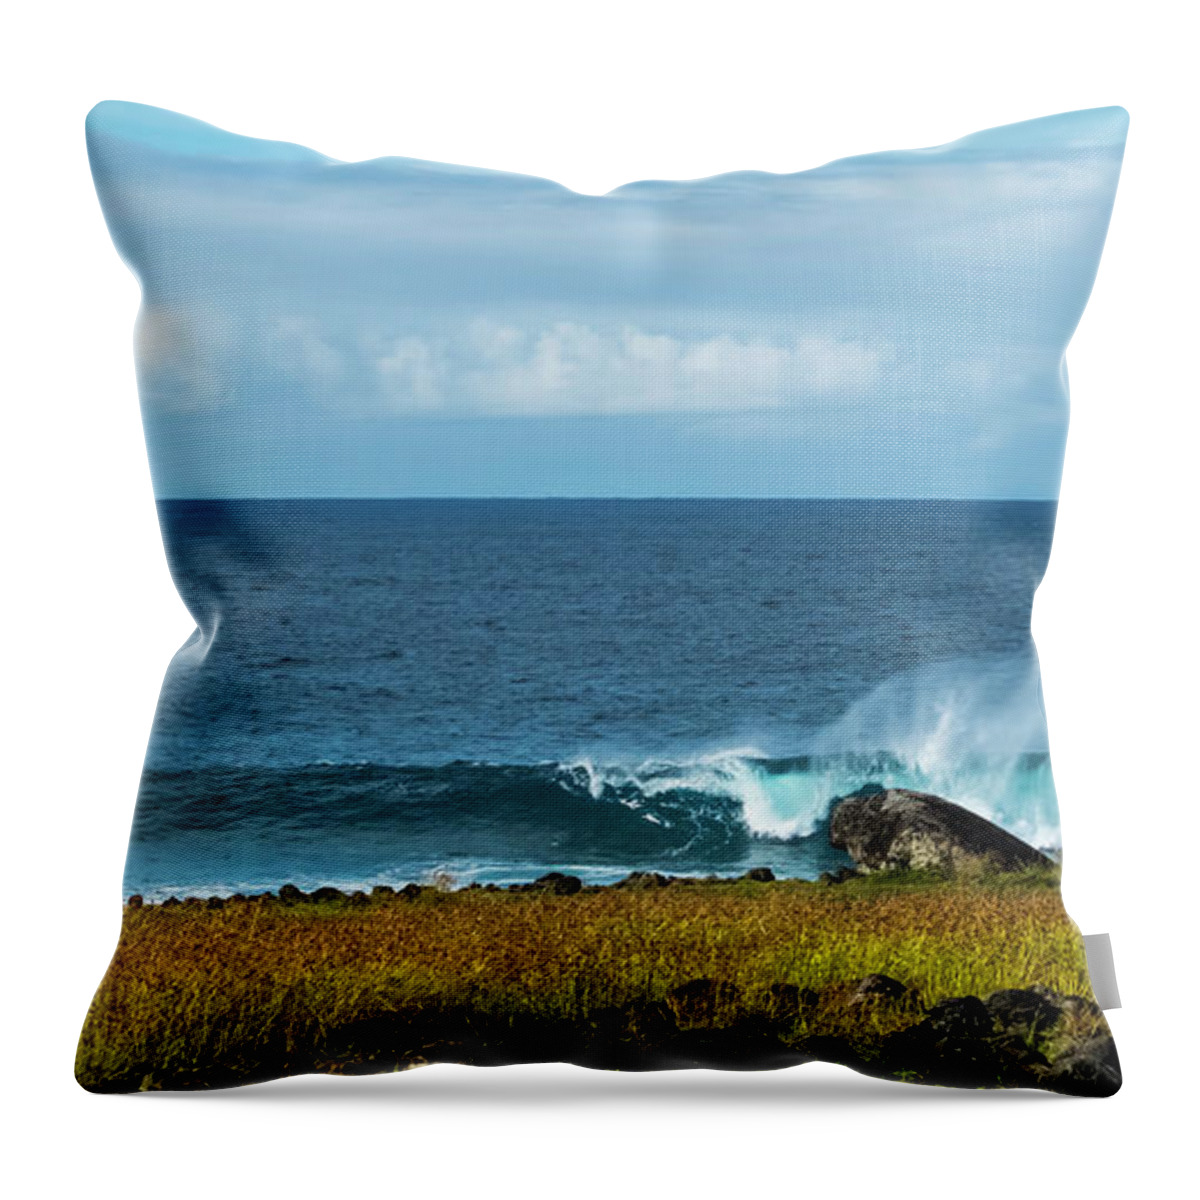 Easter Island Throw Pillow featuring the photograph Easter Island Surf by John Roach